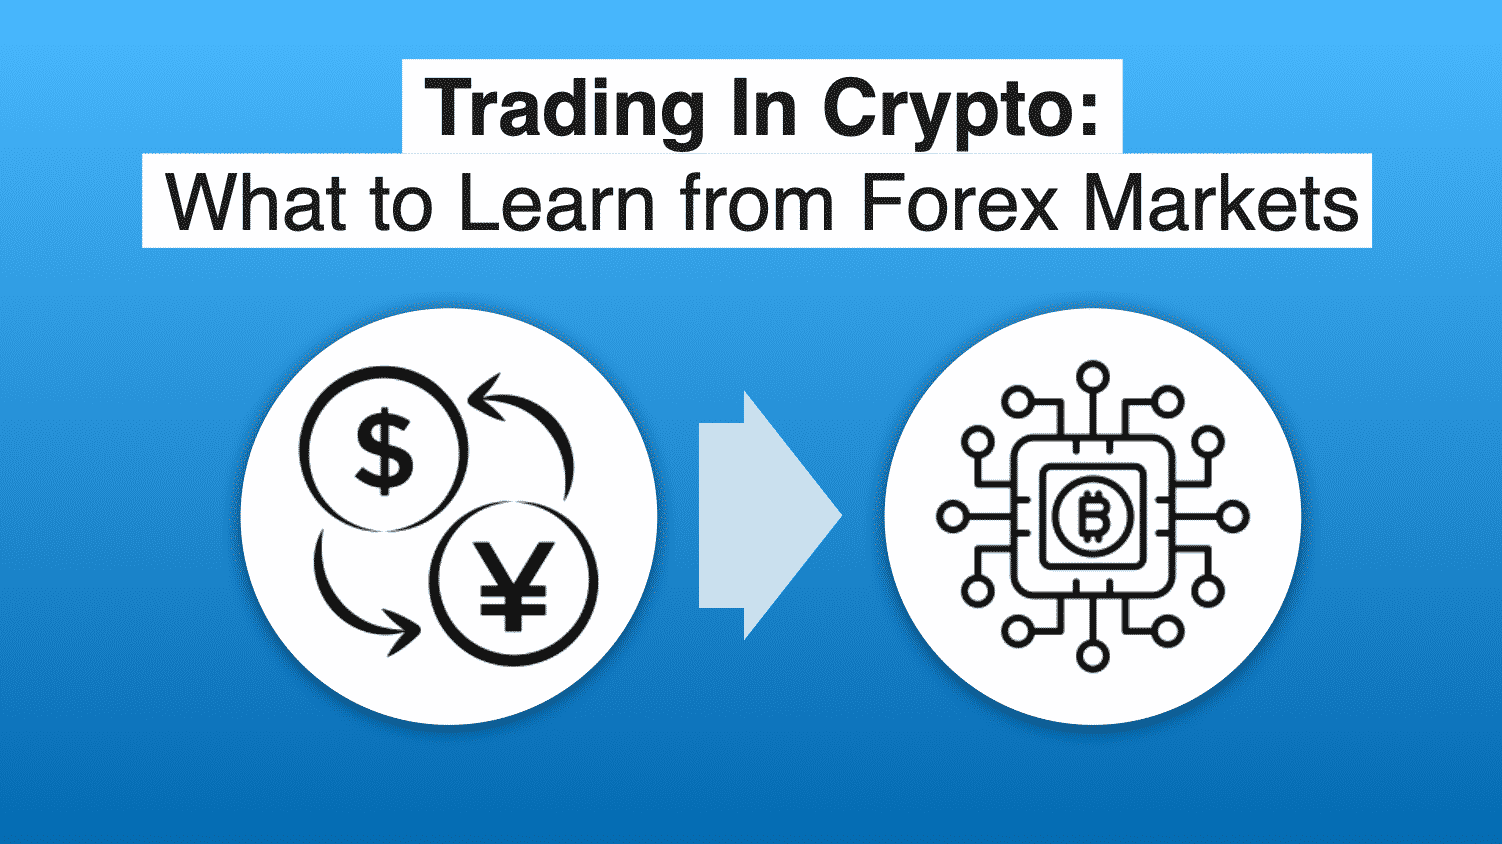 Trading In Crypto:   What to Learn from Forex Markets